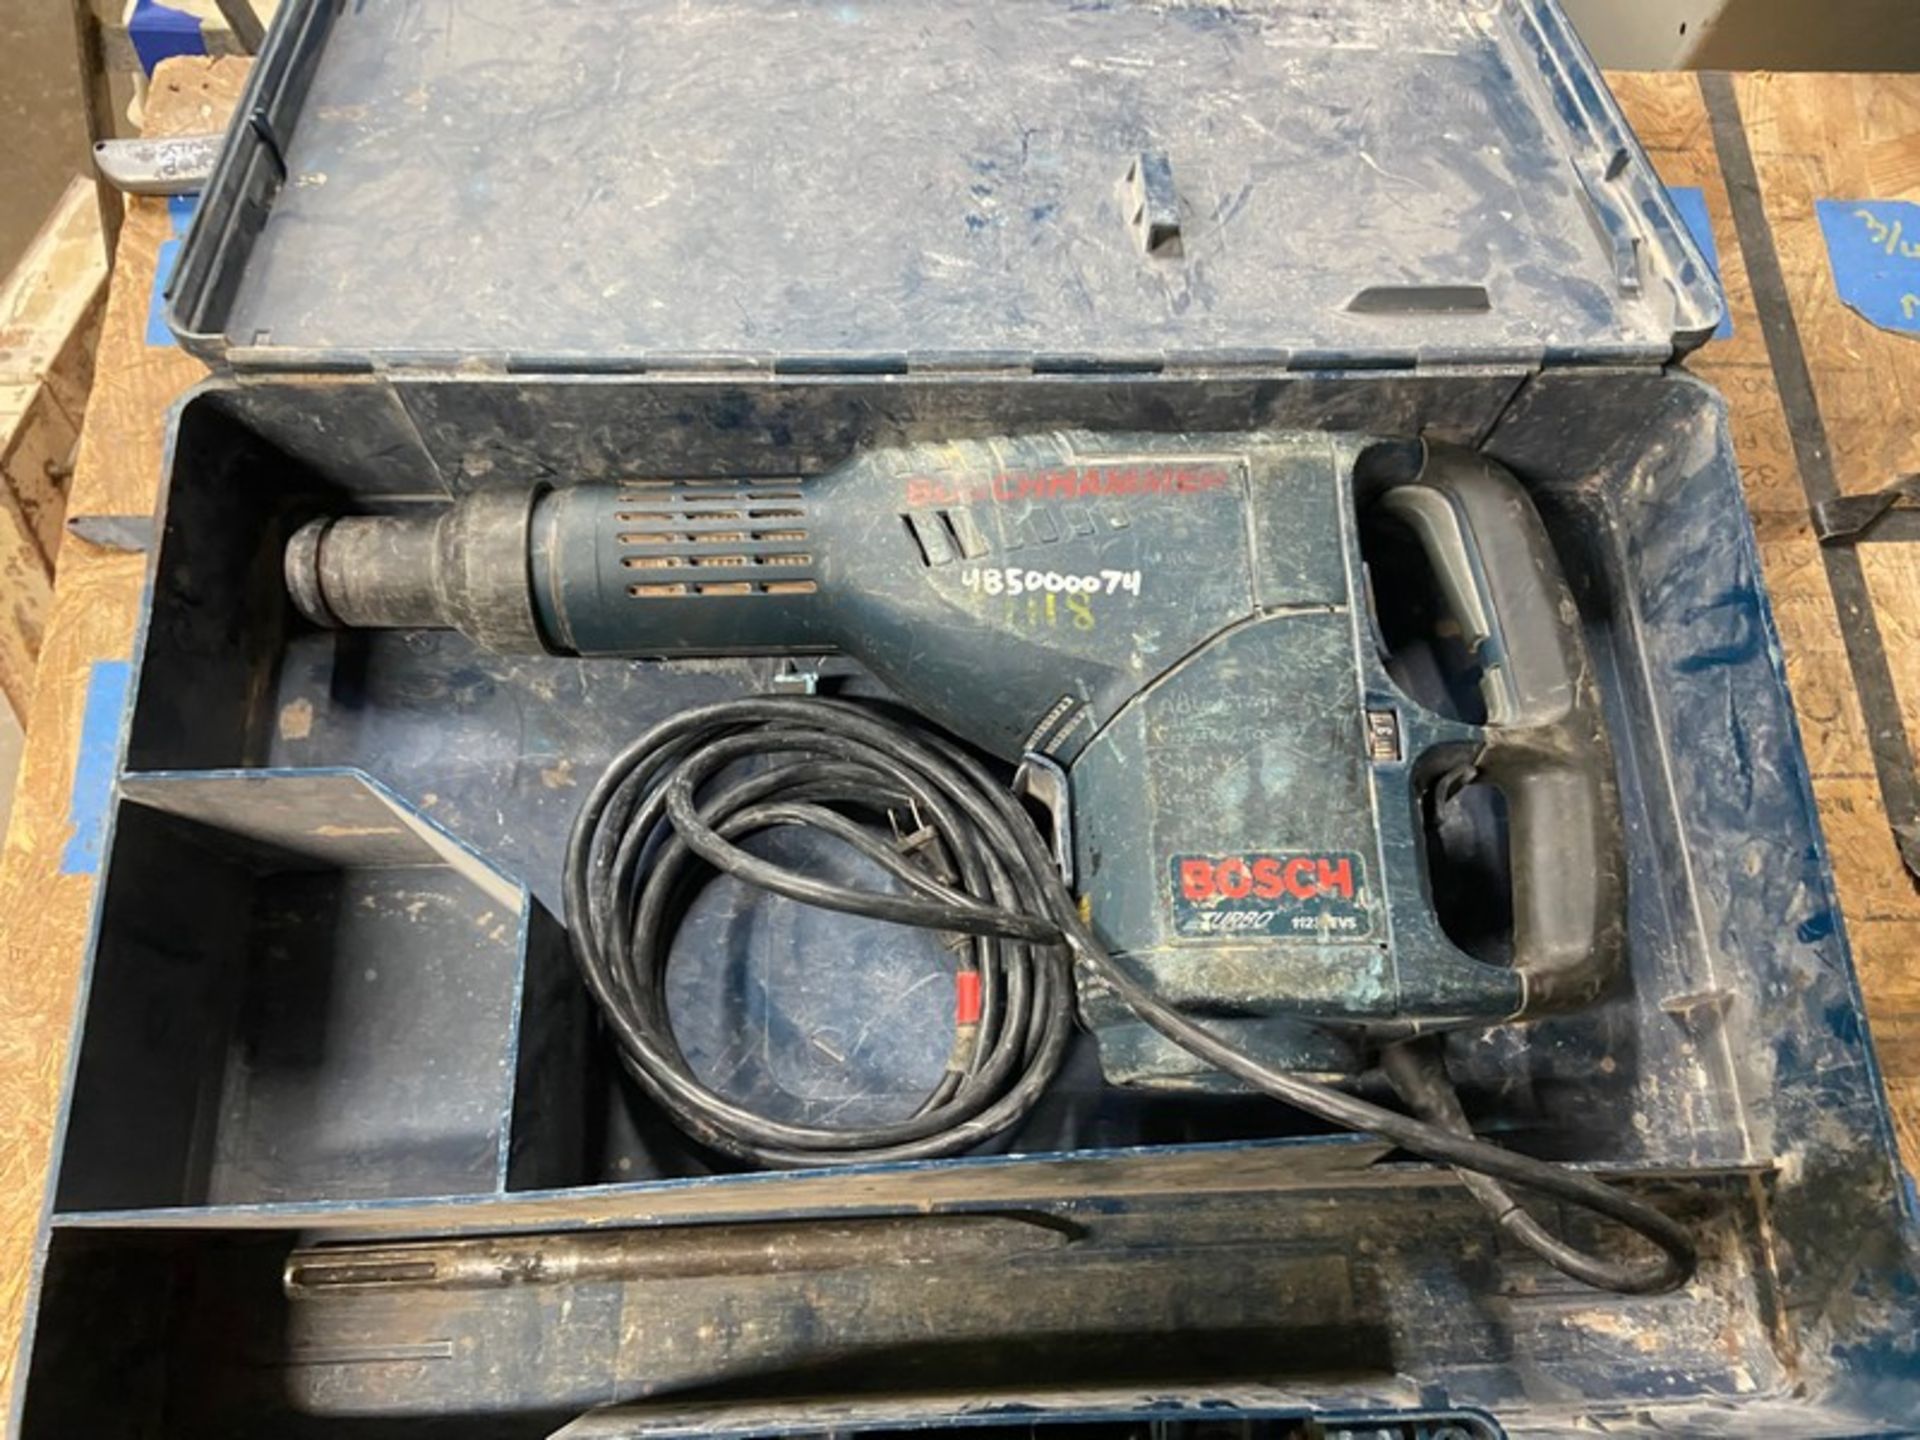 Bosch Power Rotary Hammer Drill, M/N BOSCHHAMMER, S/N 485000074, with Power Cord & Hard Case ( - Image 3 of 4